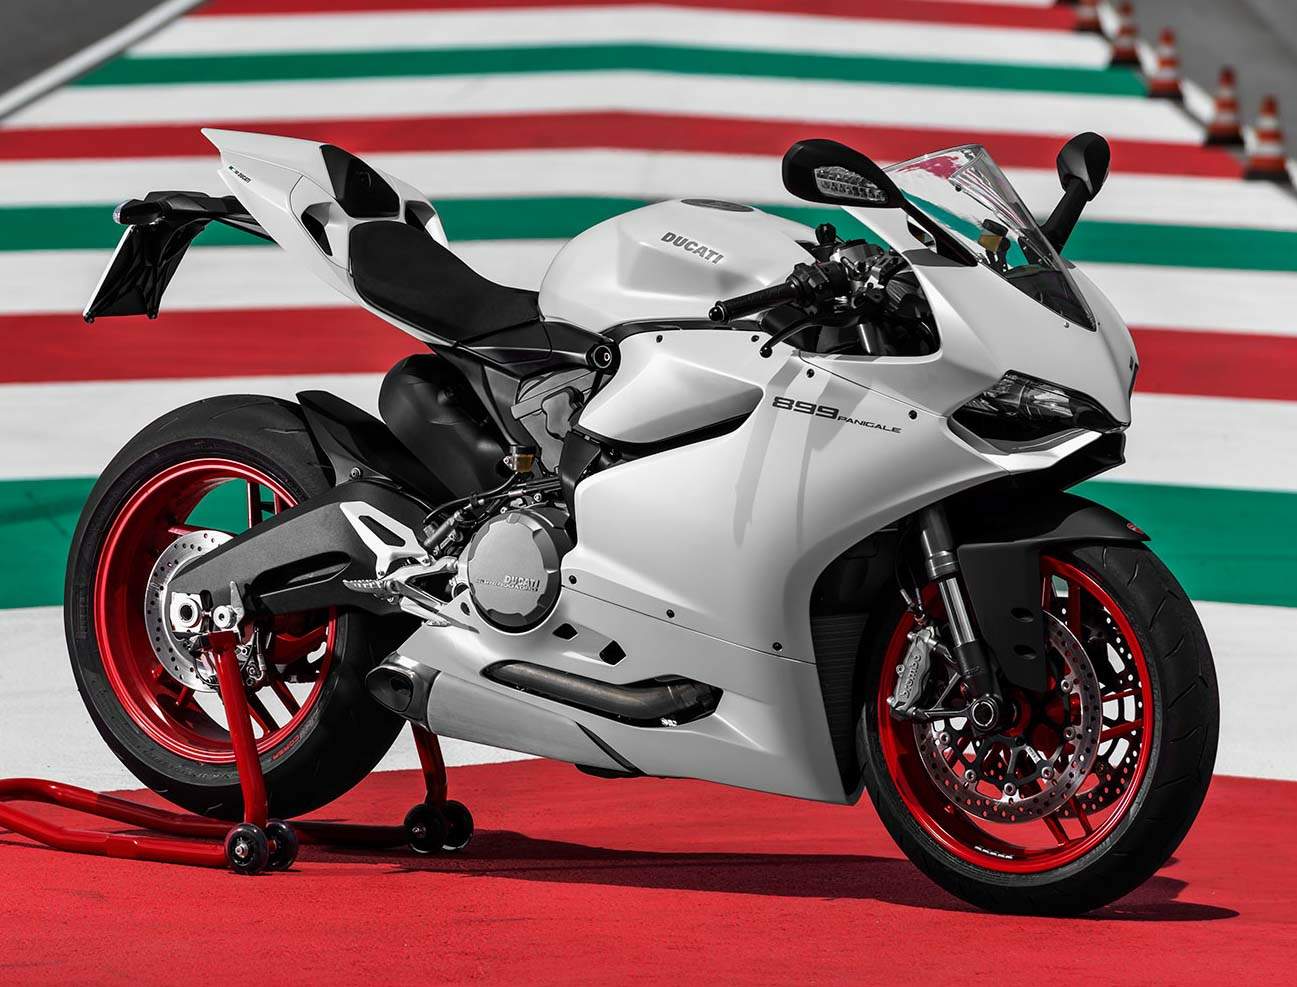 Ducati 899 Panigale (2015) technical specifications